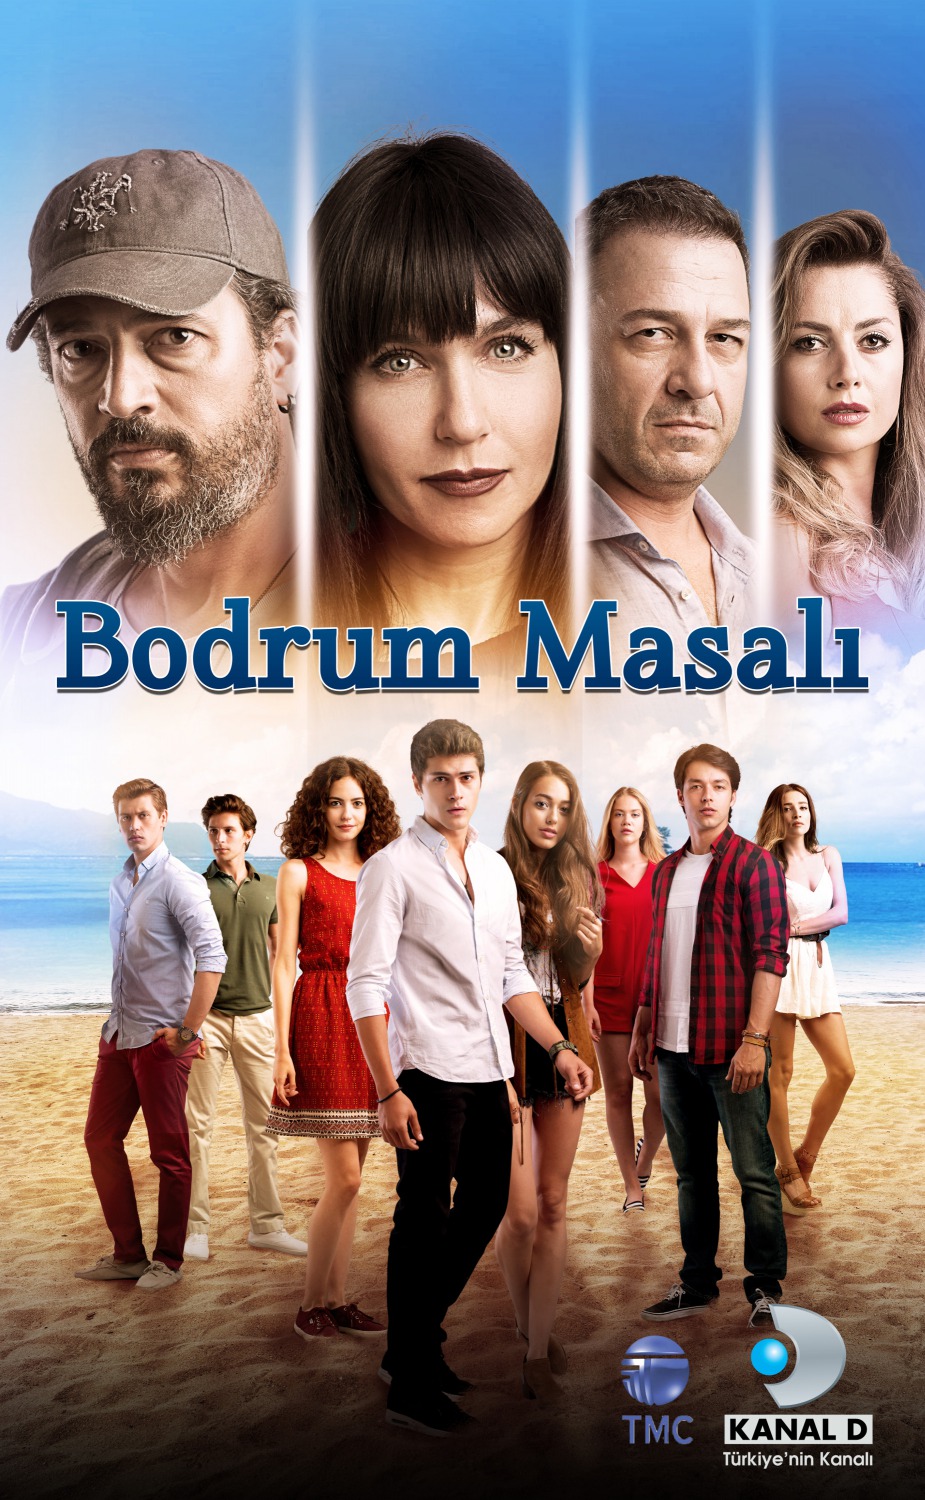 Extra Large TV Poster Image for Bodrum Masali 